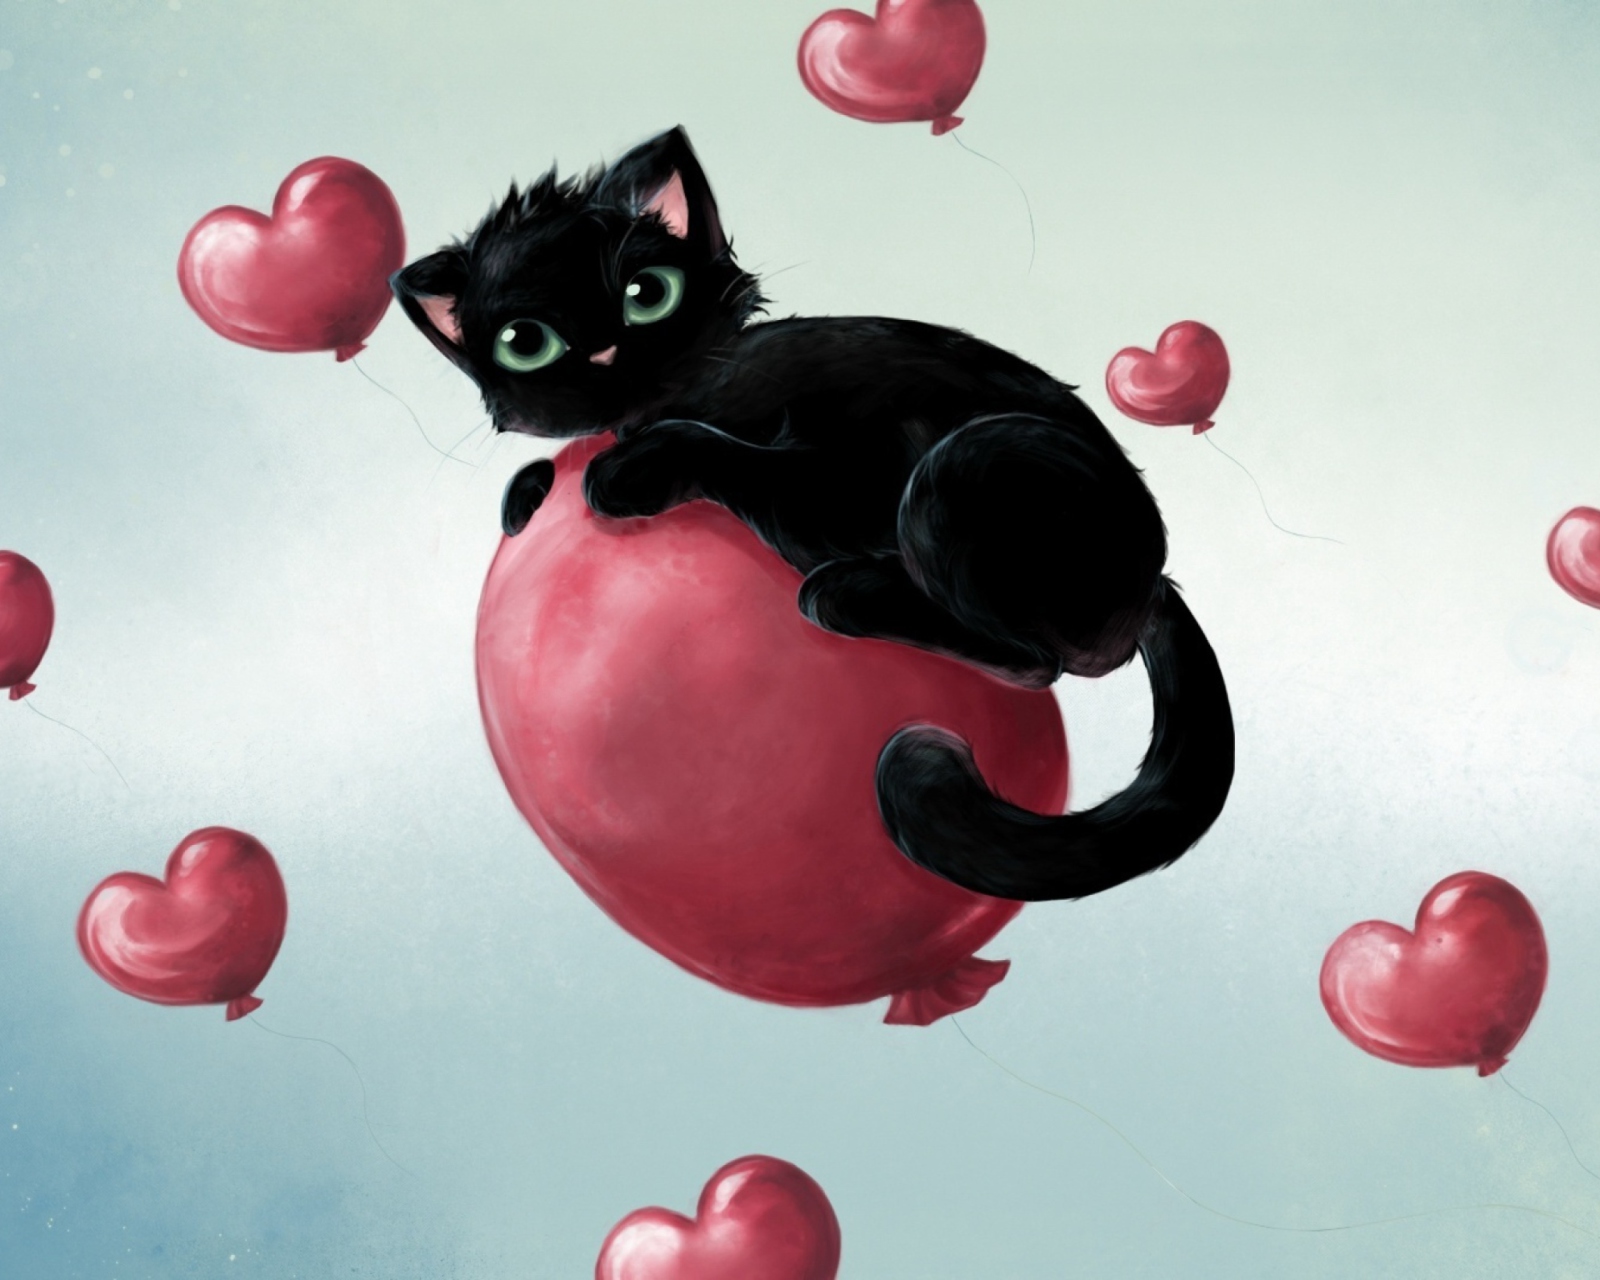 Black Kitty And Baloons wallpaper 1600x1280